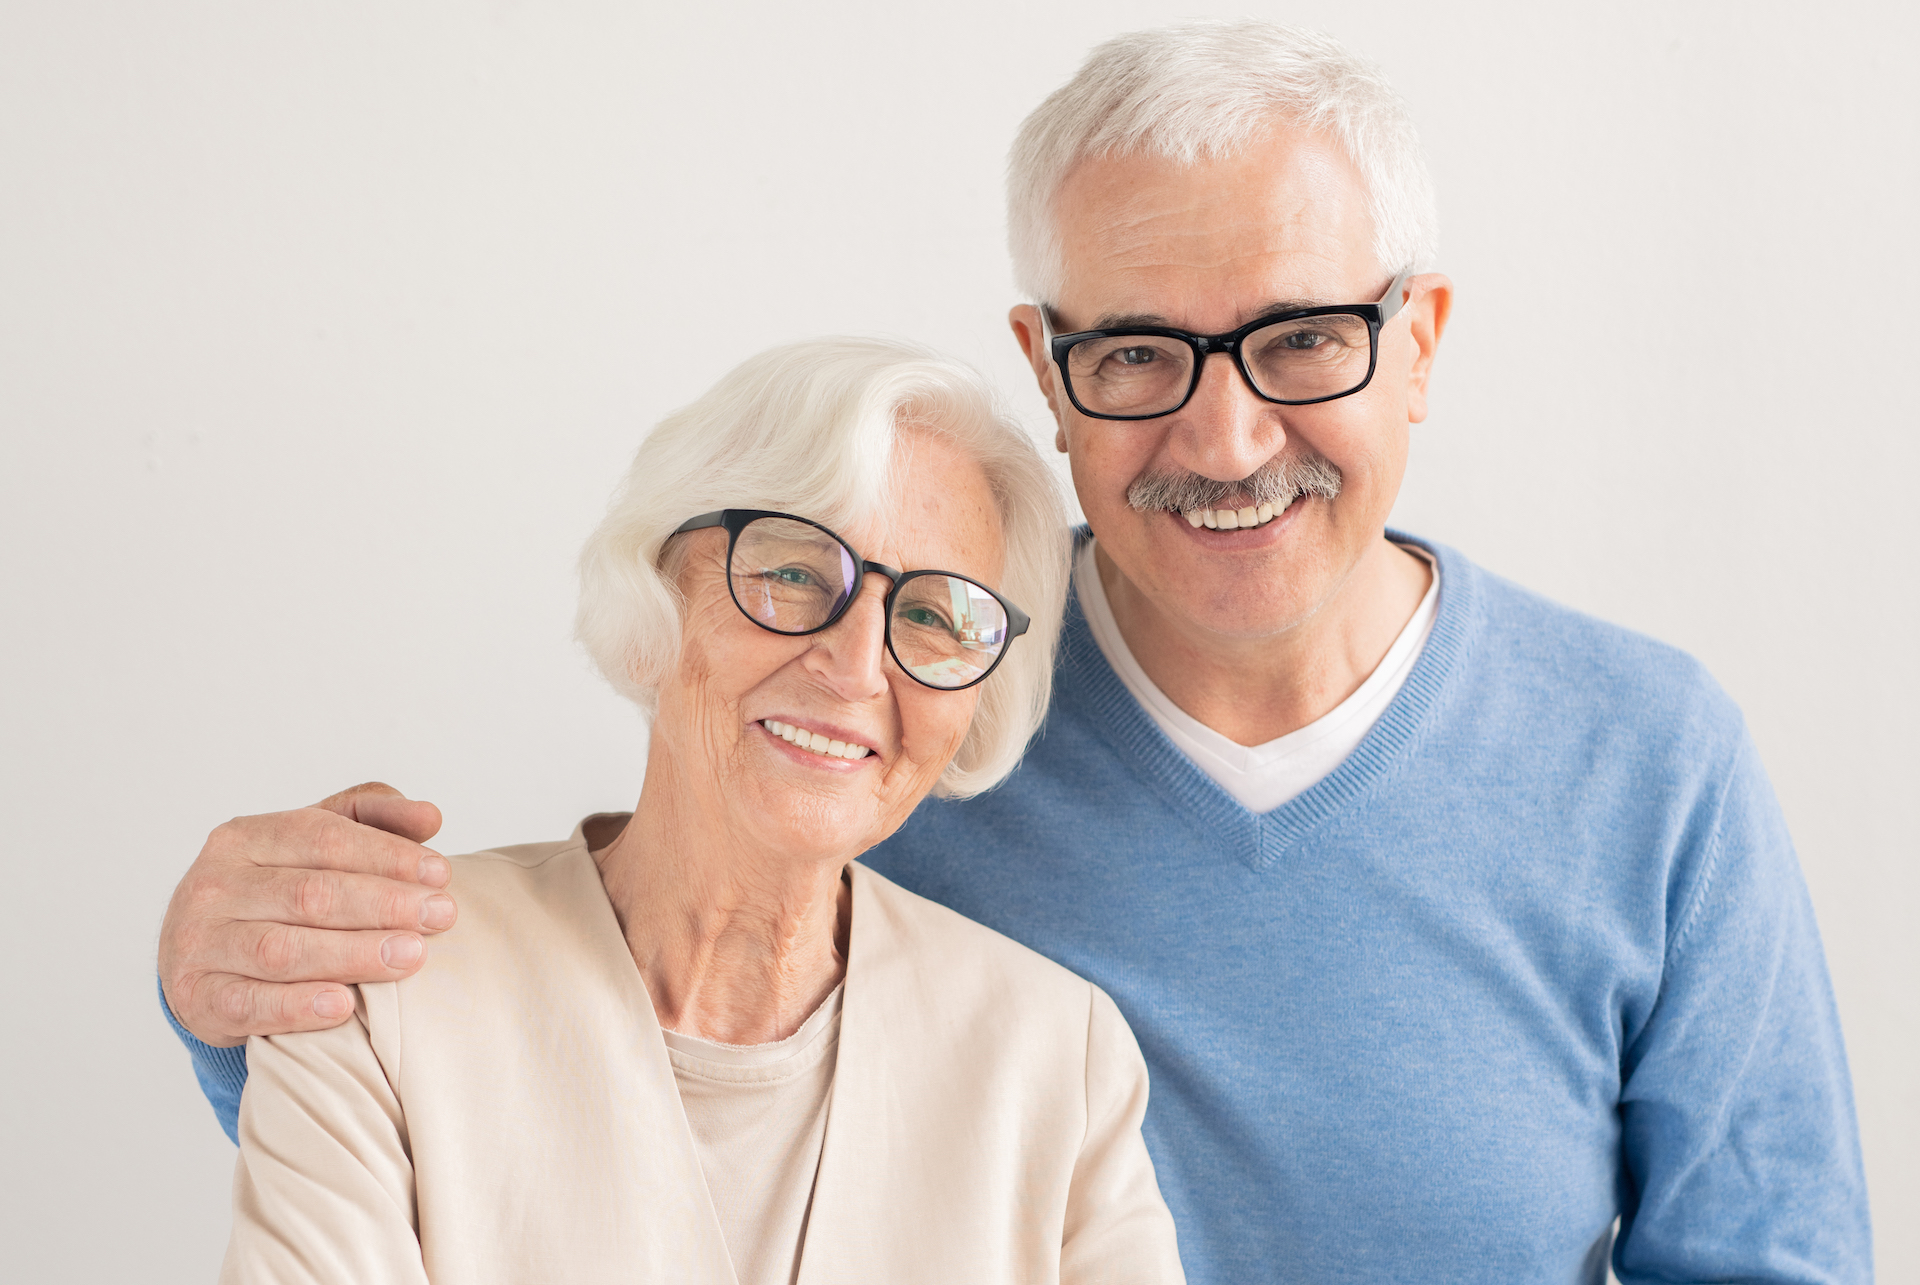 Happy senior affectionate couple with toothy smiles over white background standing in front of camera